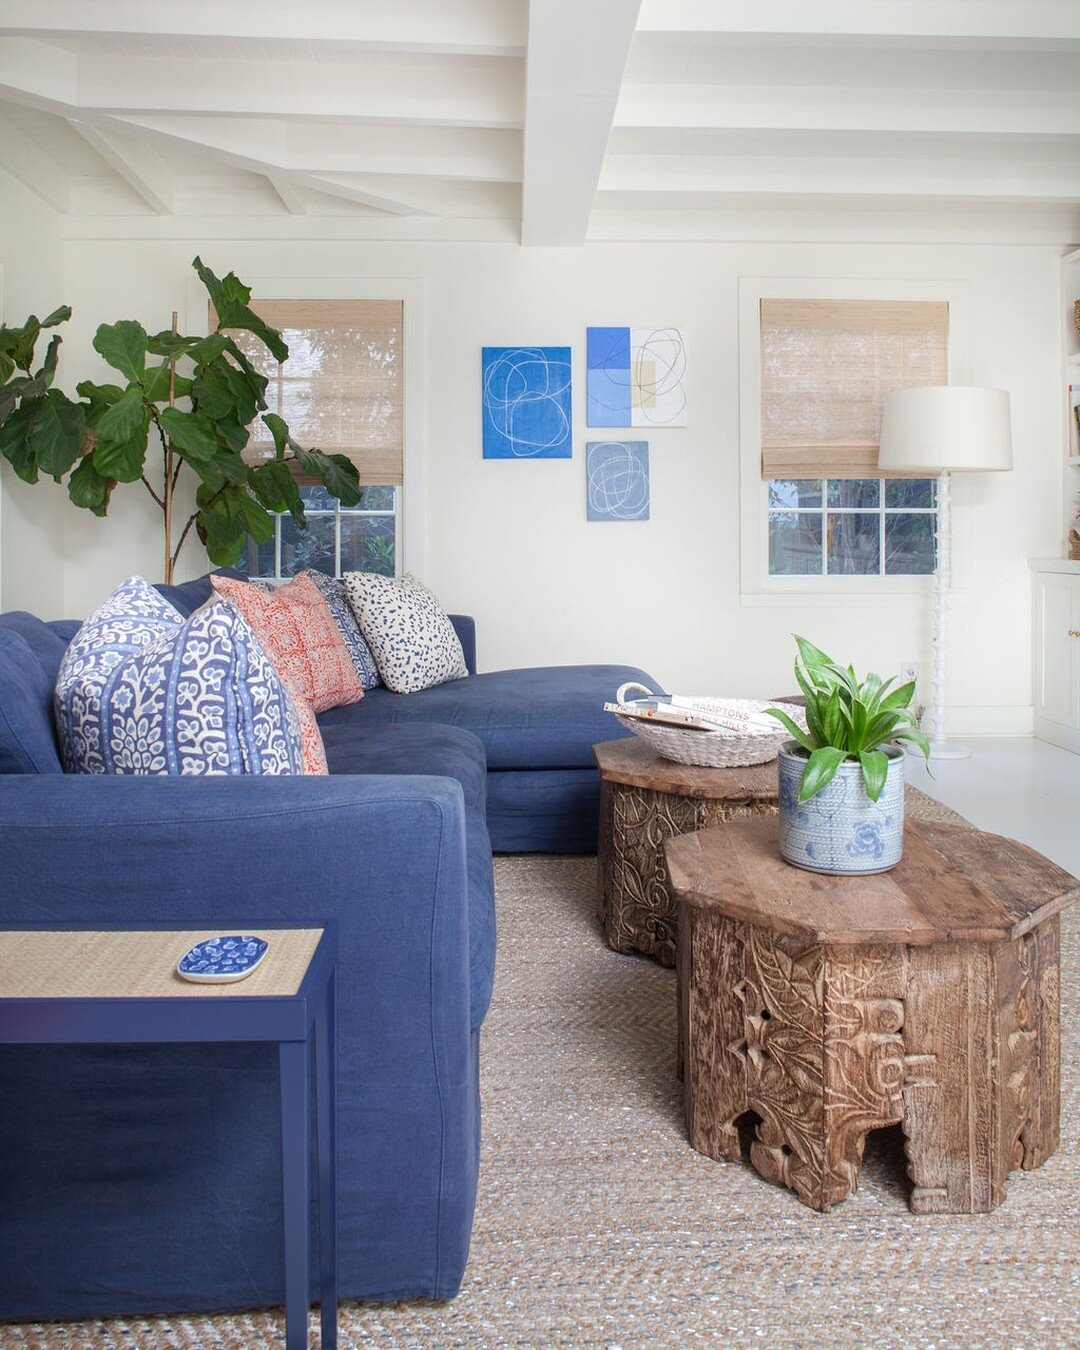 I simply adore this bright and casual beach house family room!

Brought to life through pattern play and anchored with organic elements (such as these gorgeous wood carved accent tables) the natural movement of the space is perfectly suited for its c